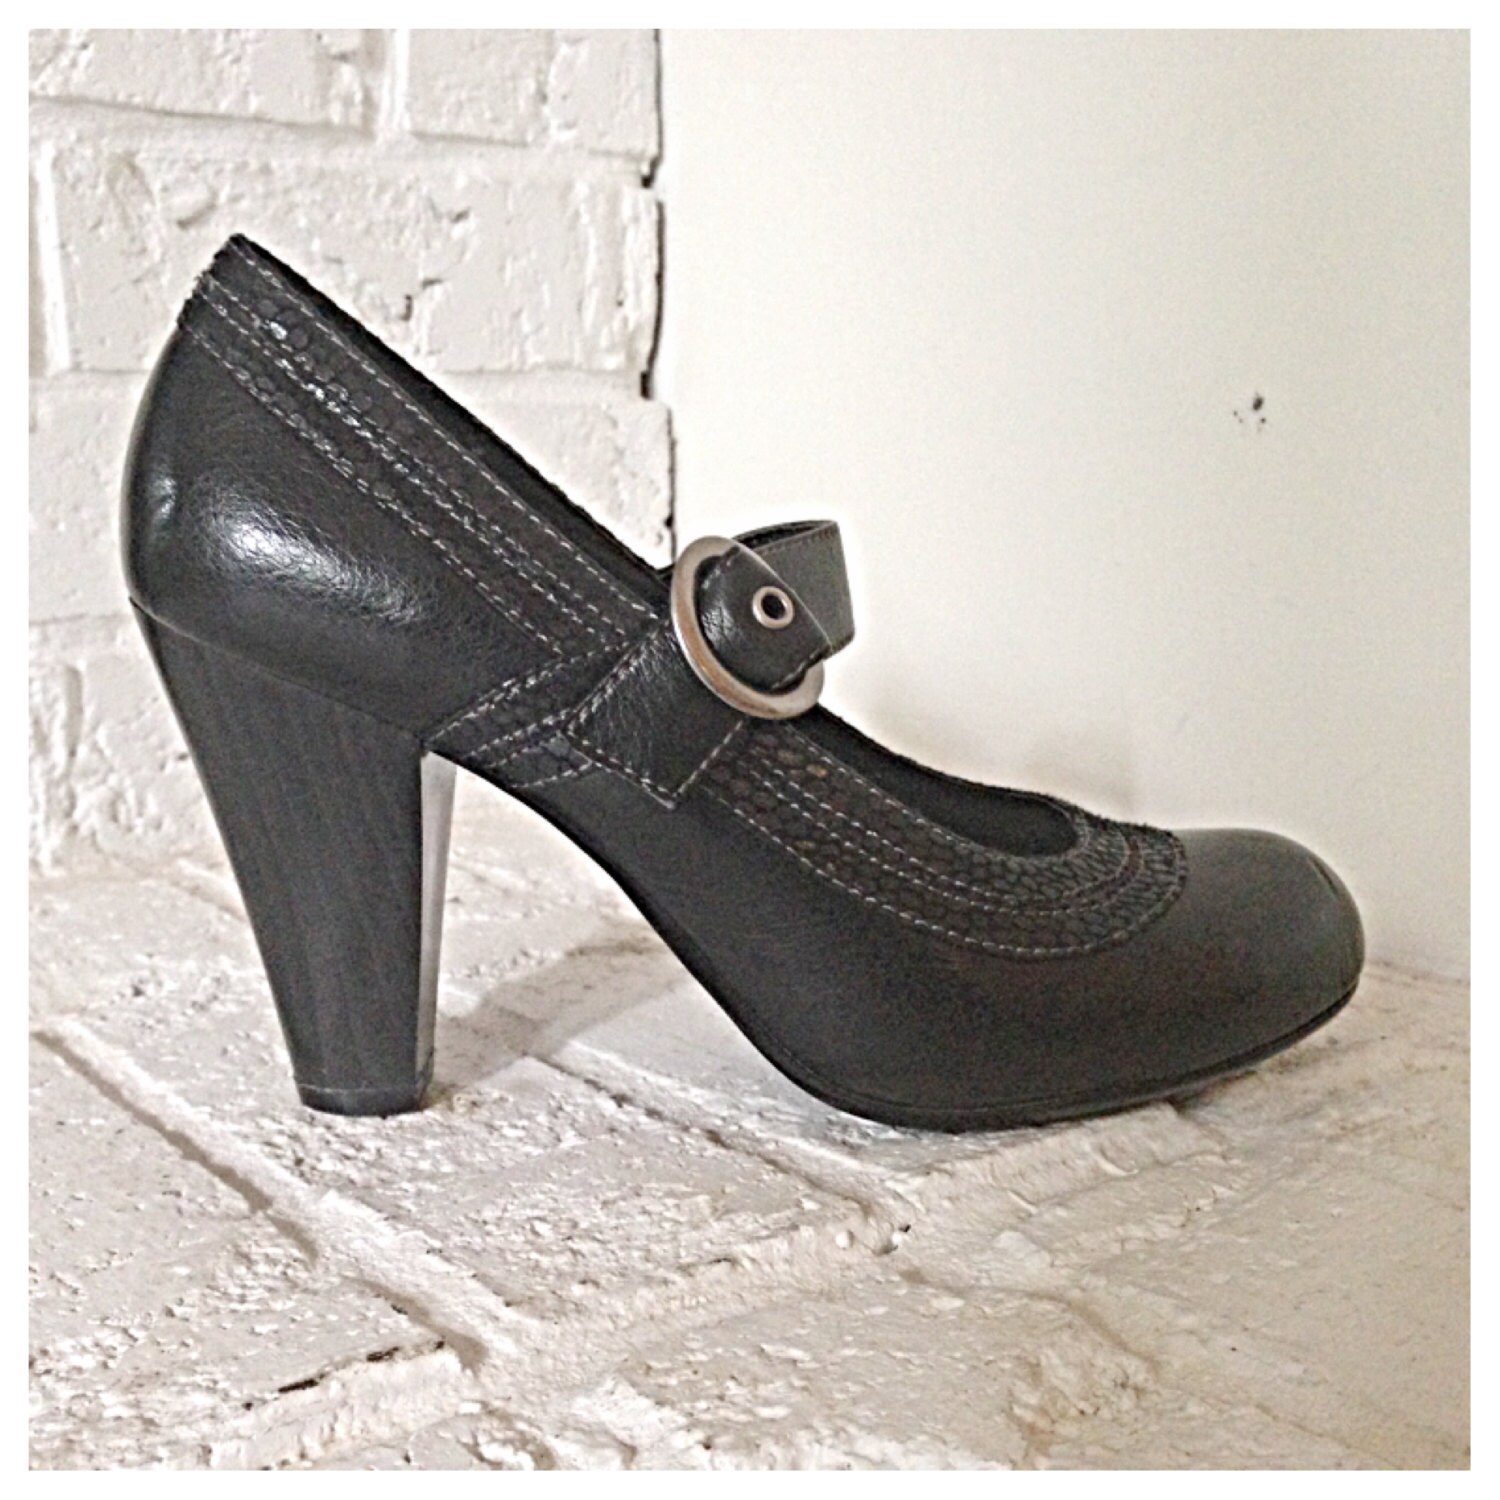 Vintage 90s Mudd Mary Jane shoes / 90s black by MainCourseVintage